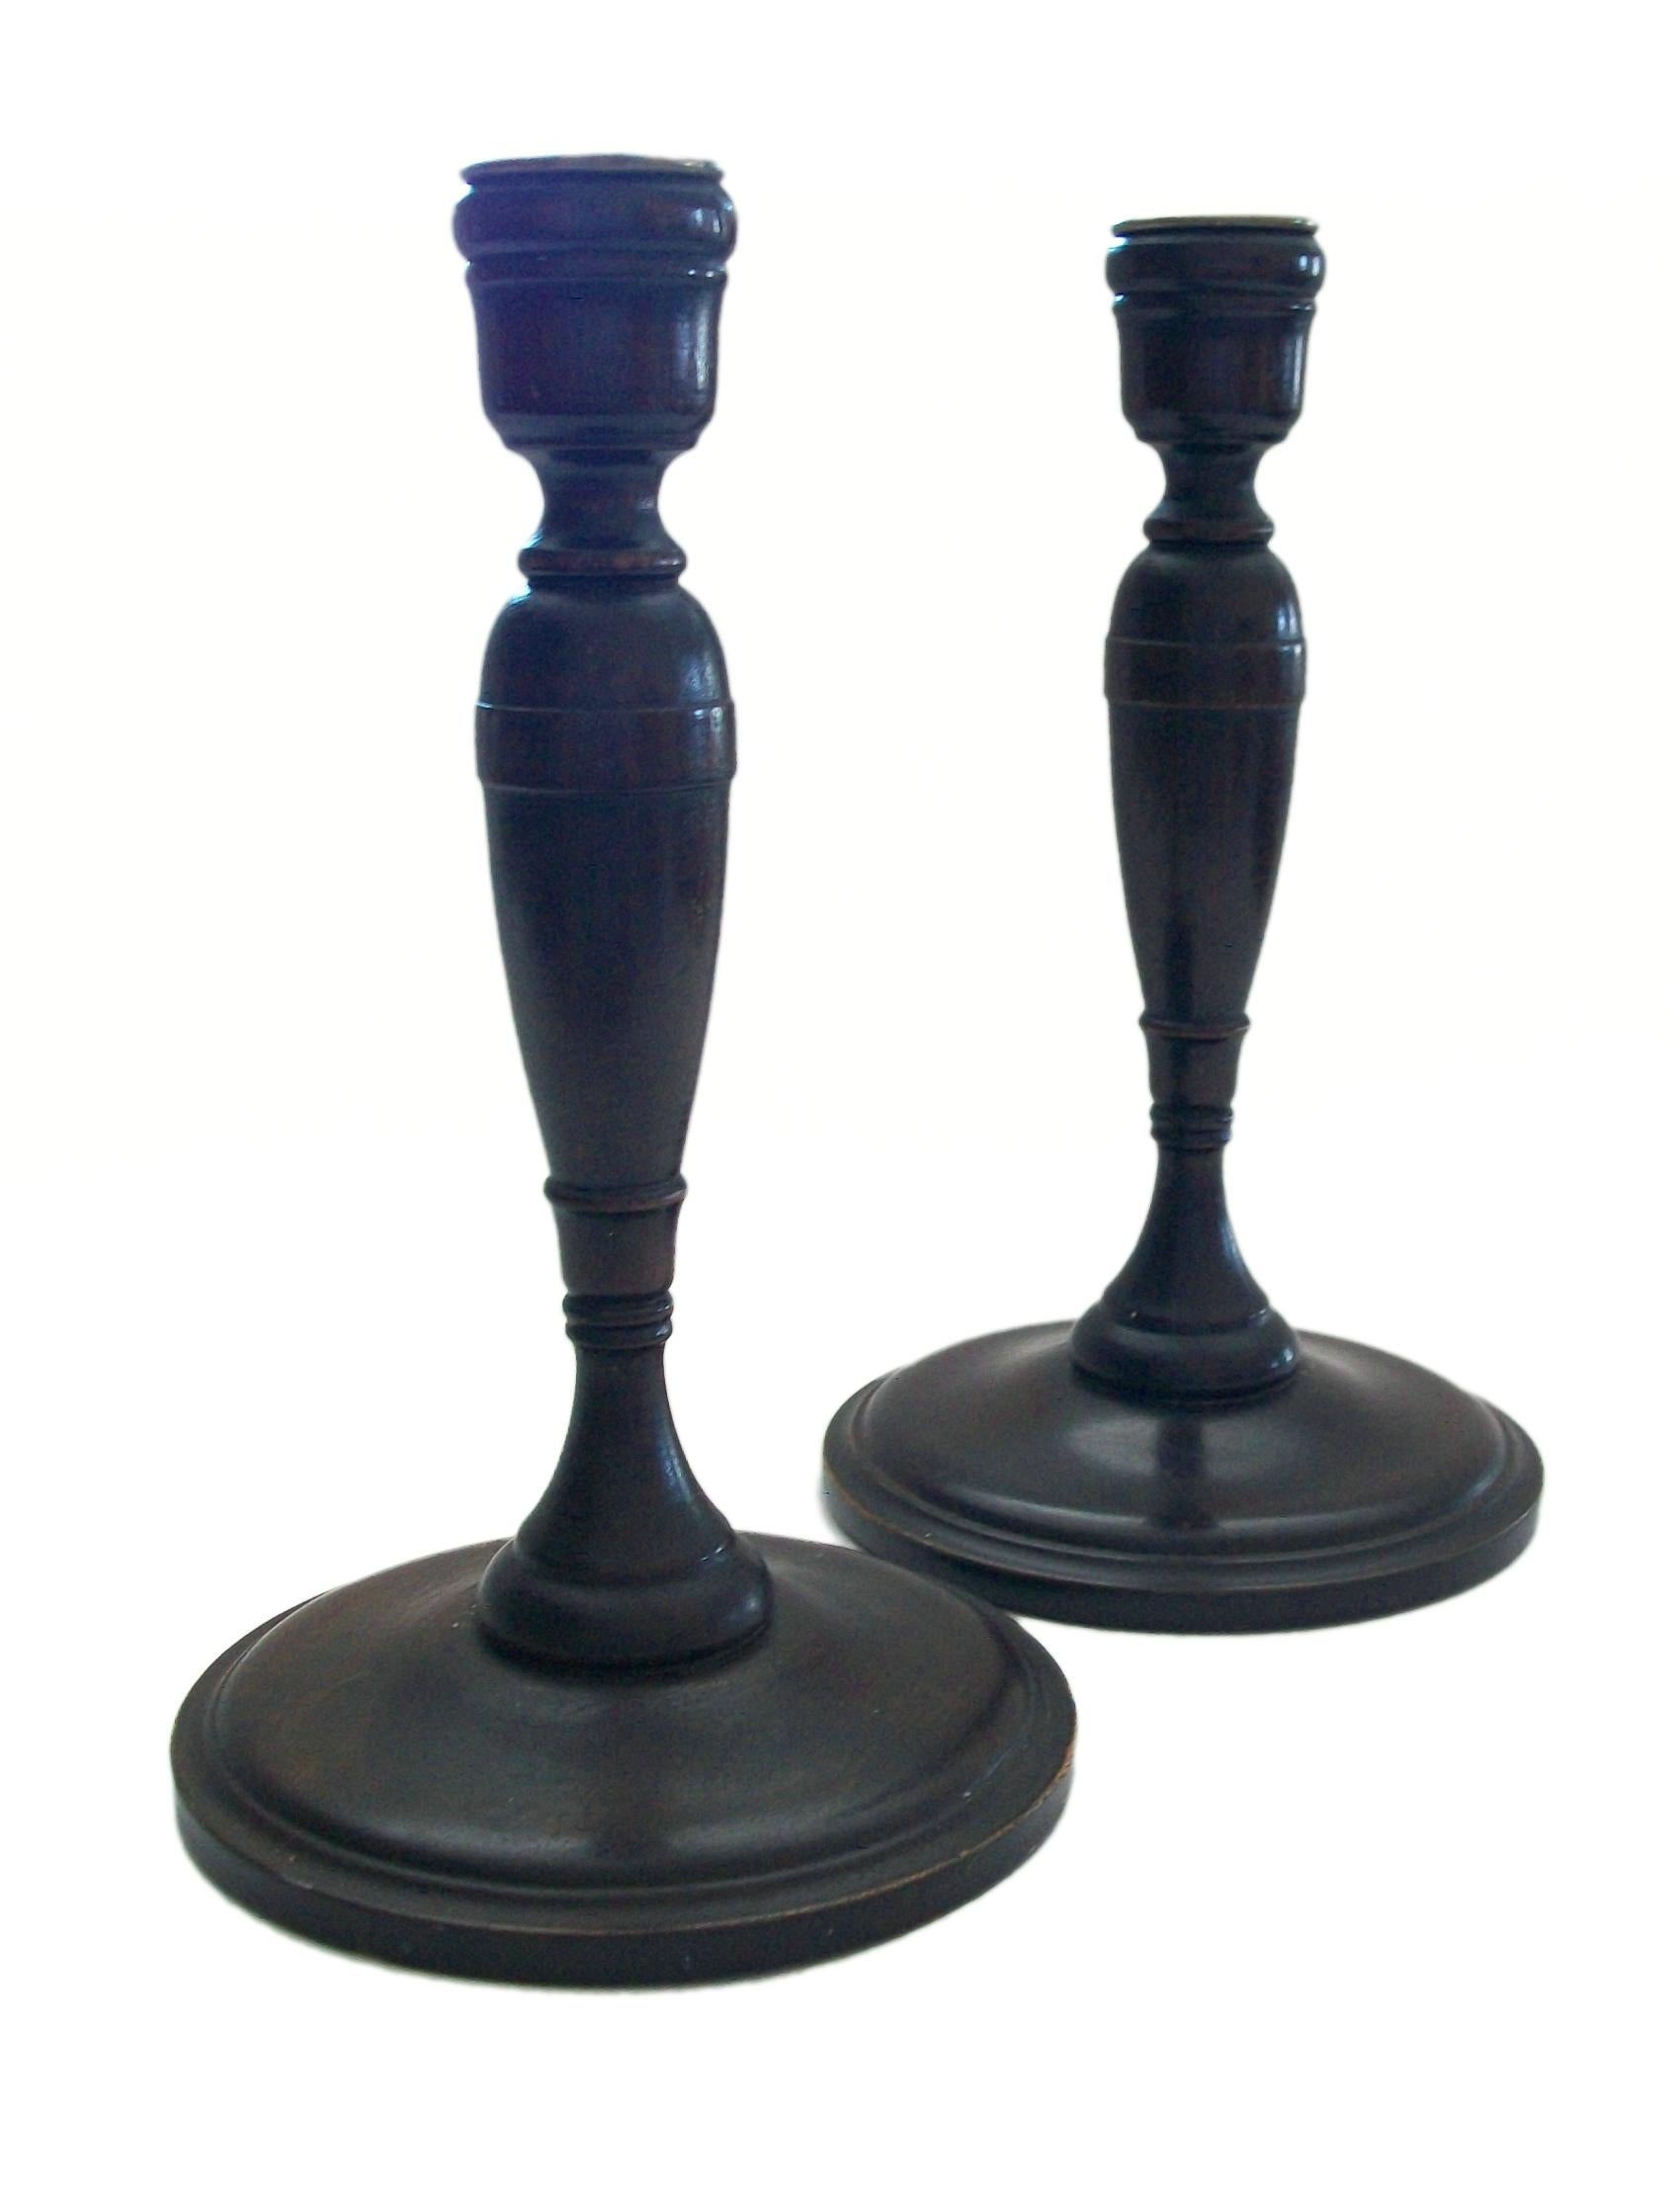 Antique American pair of hardwood candlesticks - lathe turned - original metal bobeches - original wool felt liners to the bases - unsigned - United States - circa 1900. 

Good antique condition - one minor base edge chip (as photographed) -